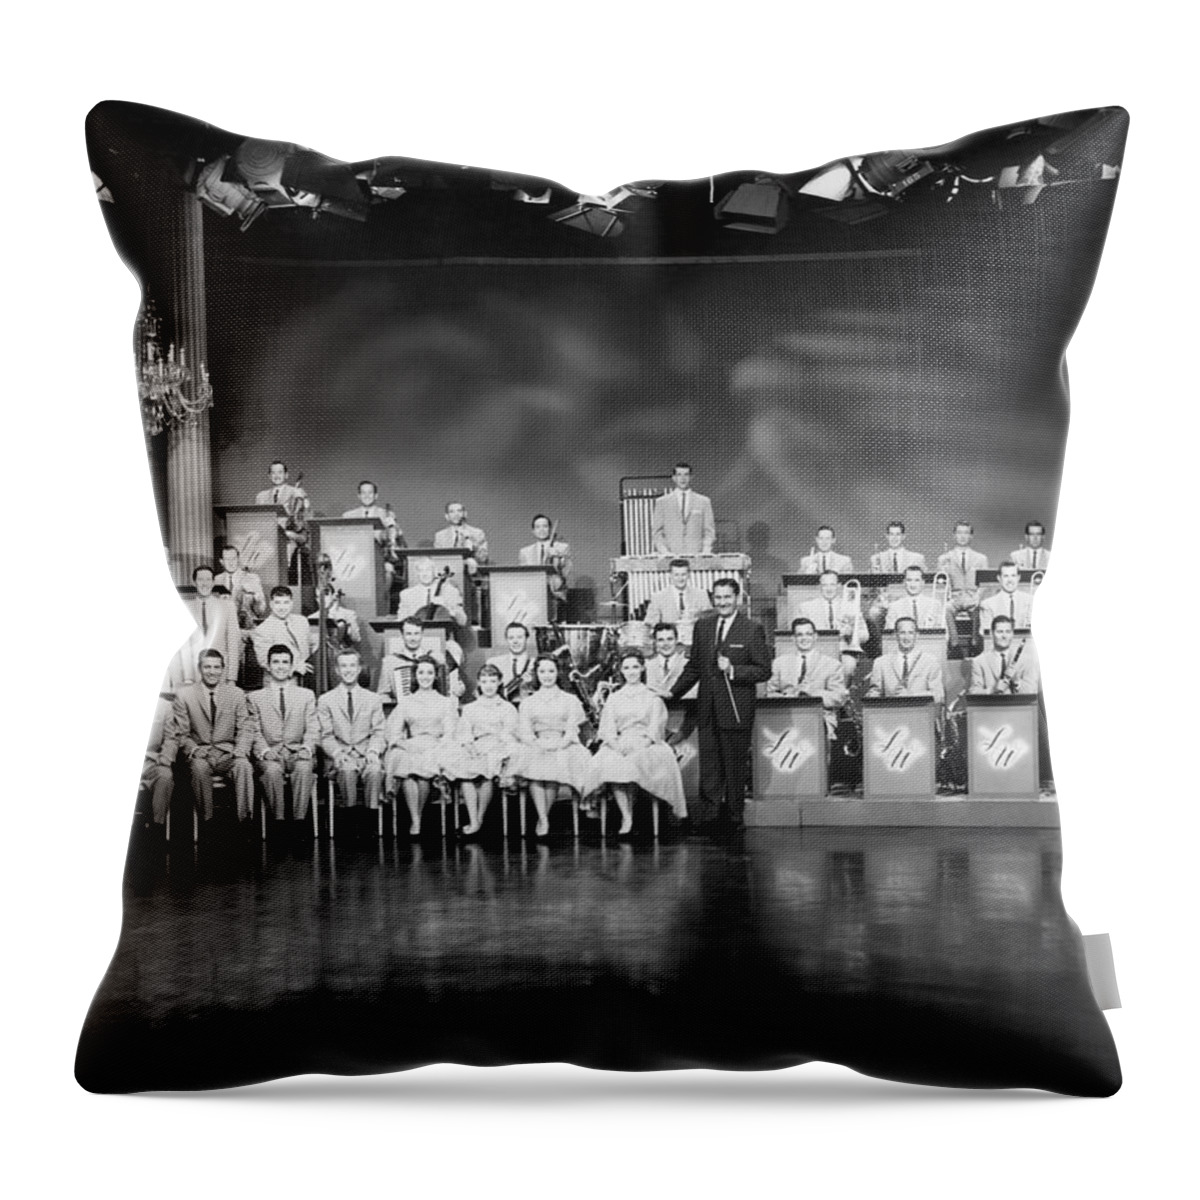 1950s Throw Pillow featuring the photograph The Lawrence Welk Show by Underwood Archives